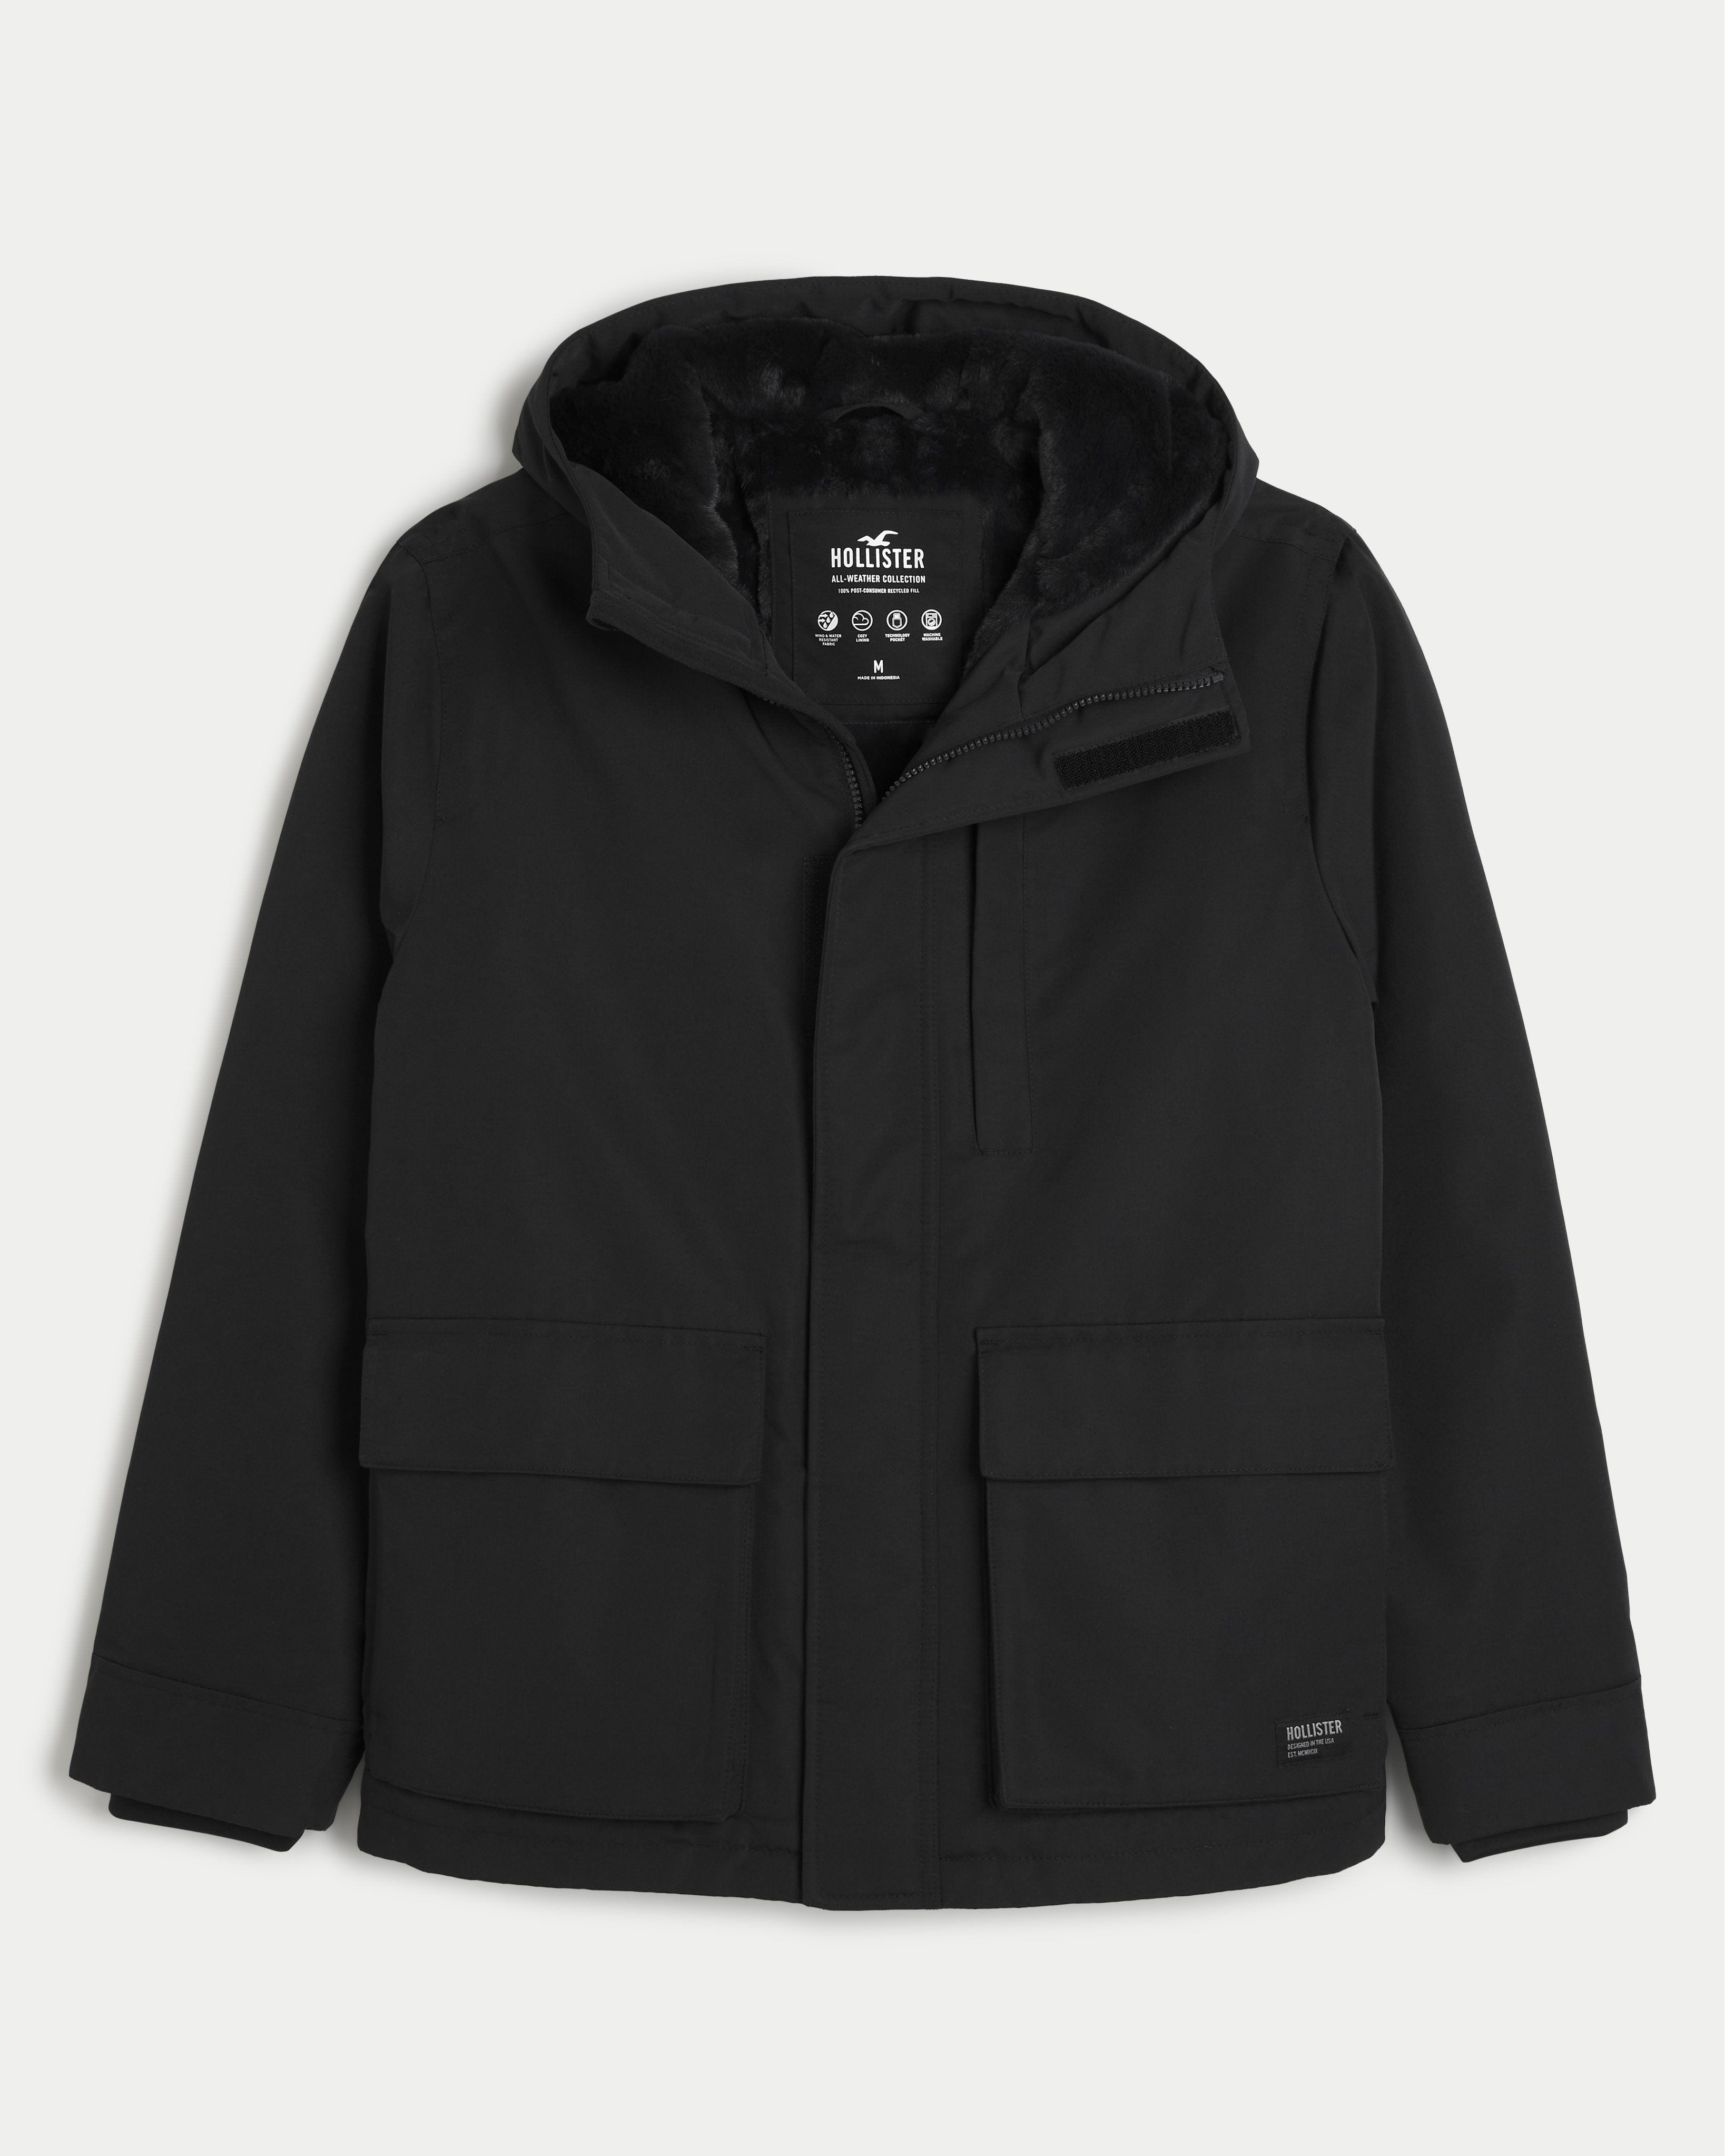 The Hollister All-Weather Jacket  All weather jackets, Girls jacket,  Outerwear jackets